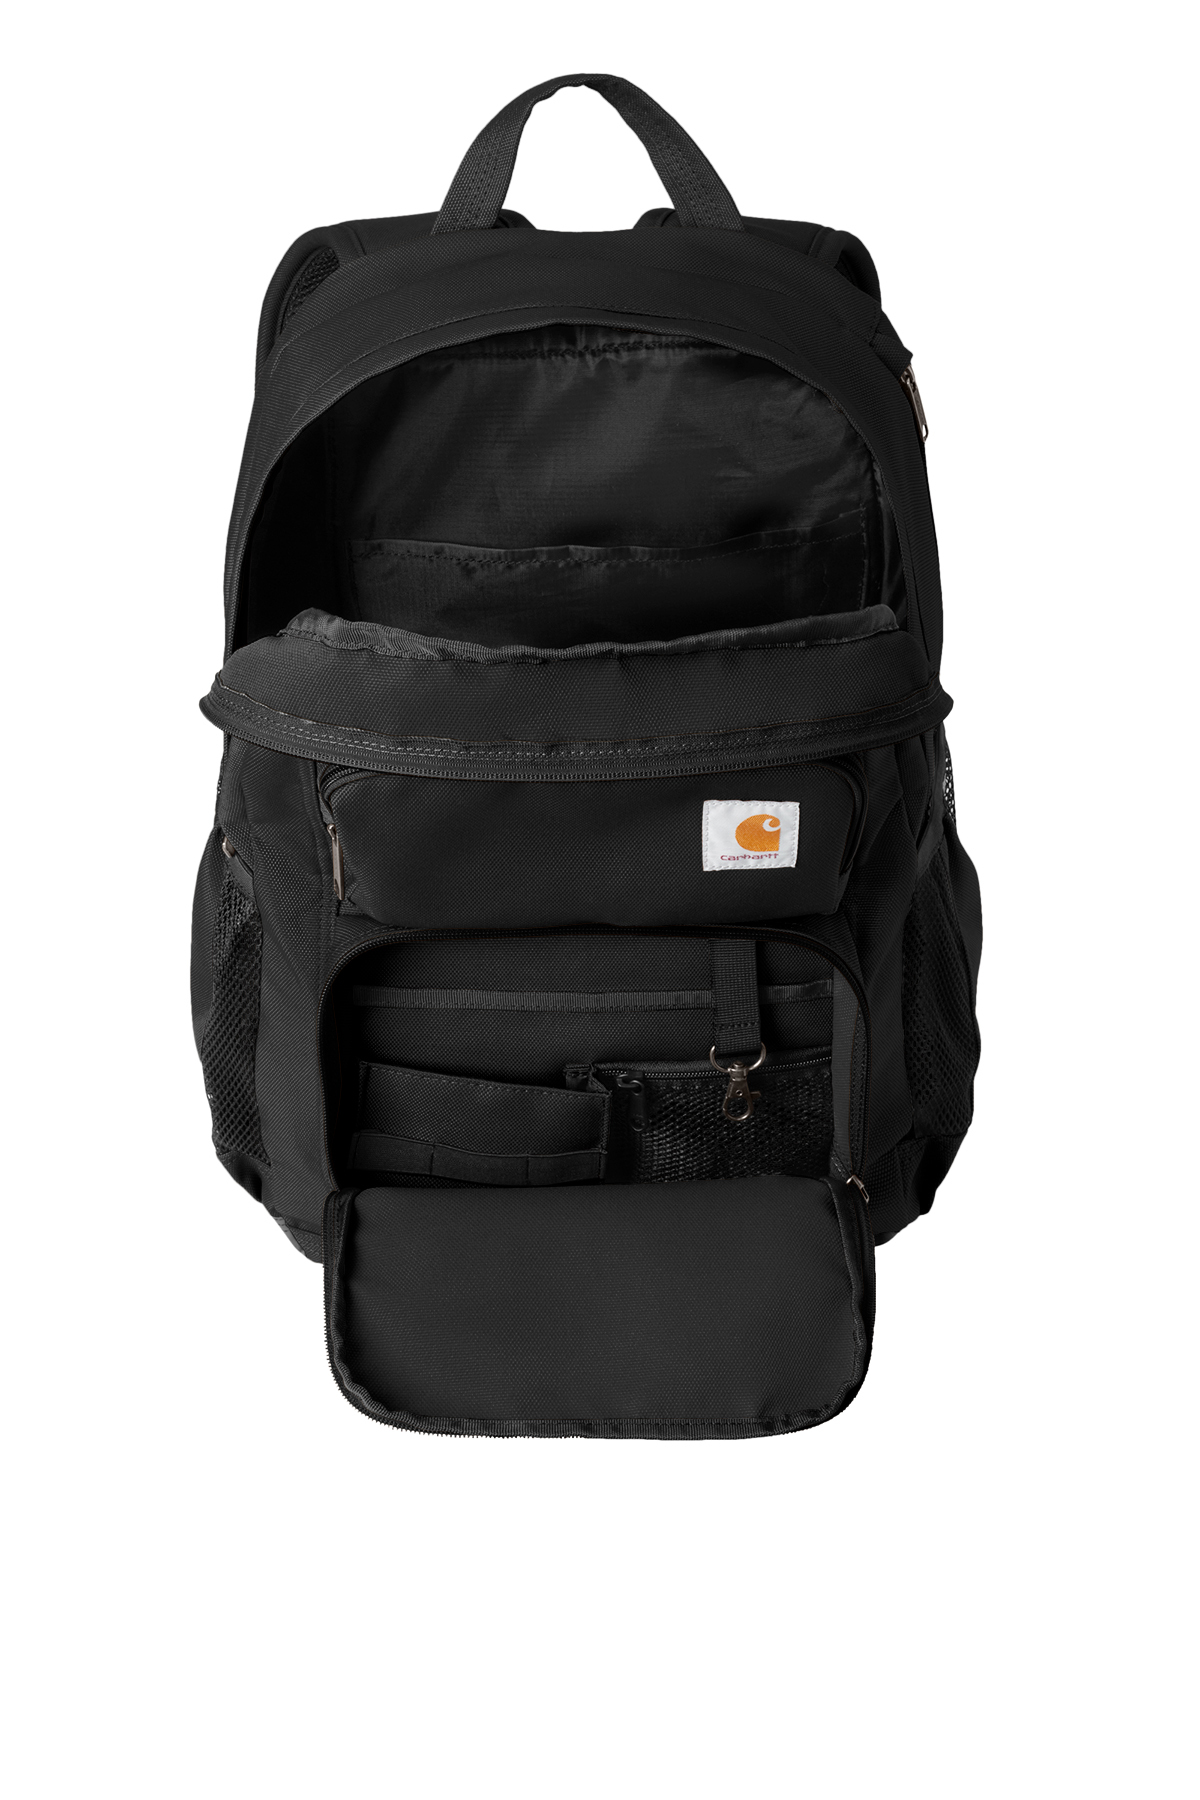 Carhartt 28L Foundry Series Dual-Compartment Backpack | Product ...